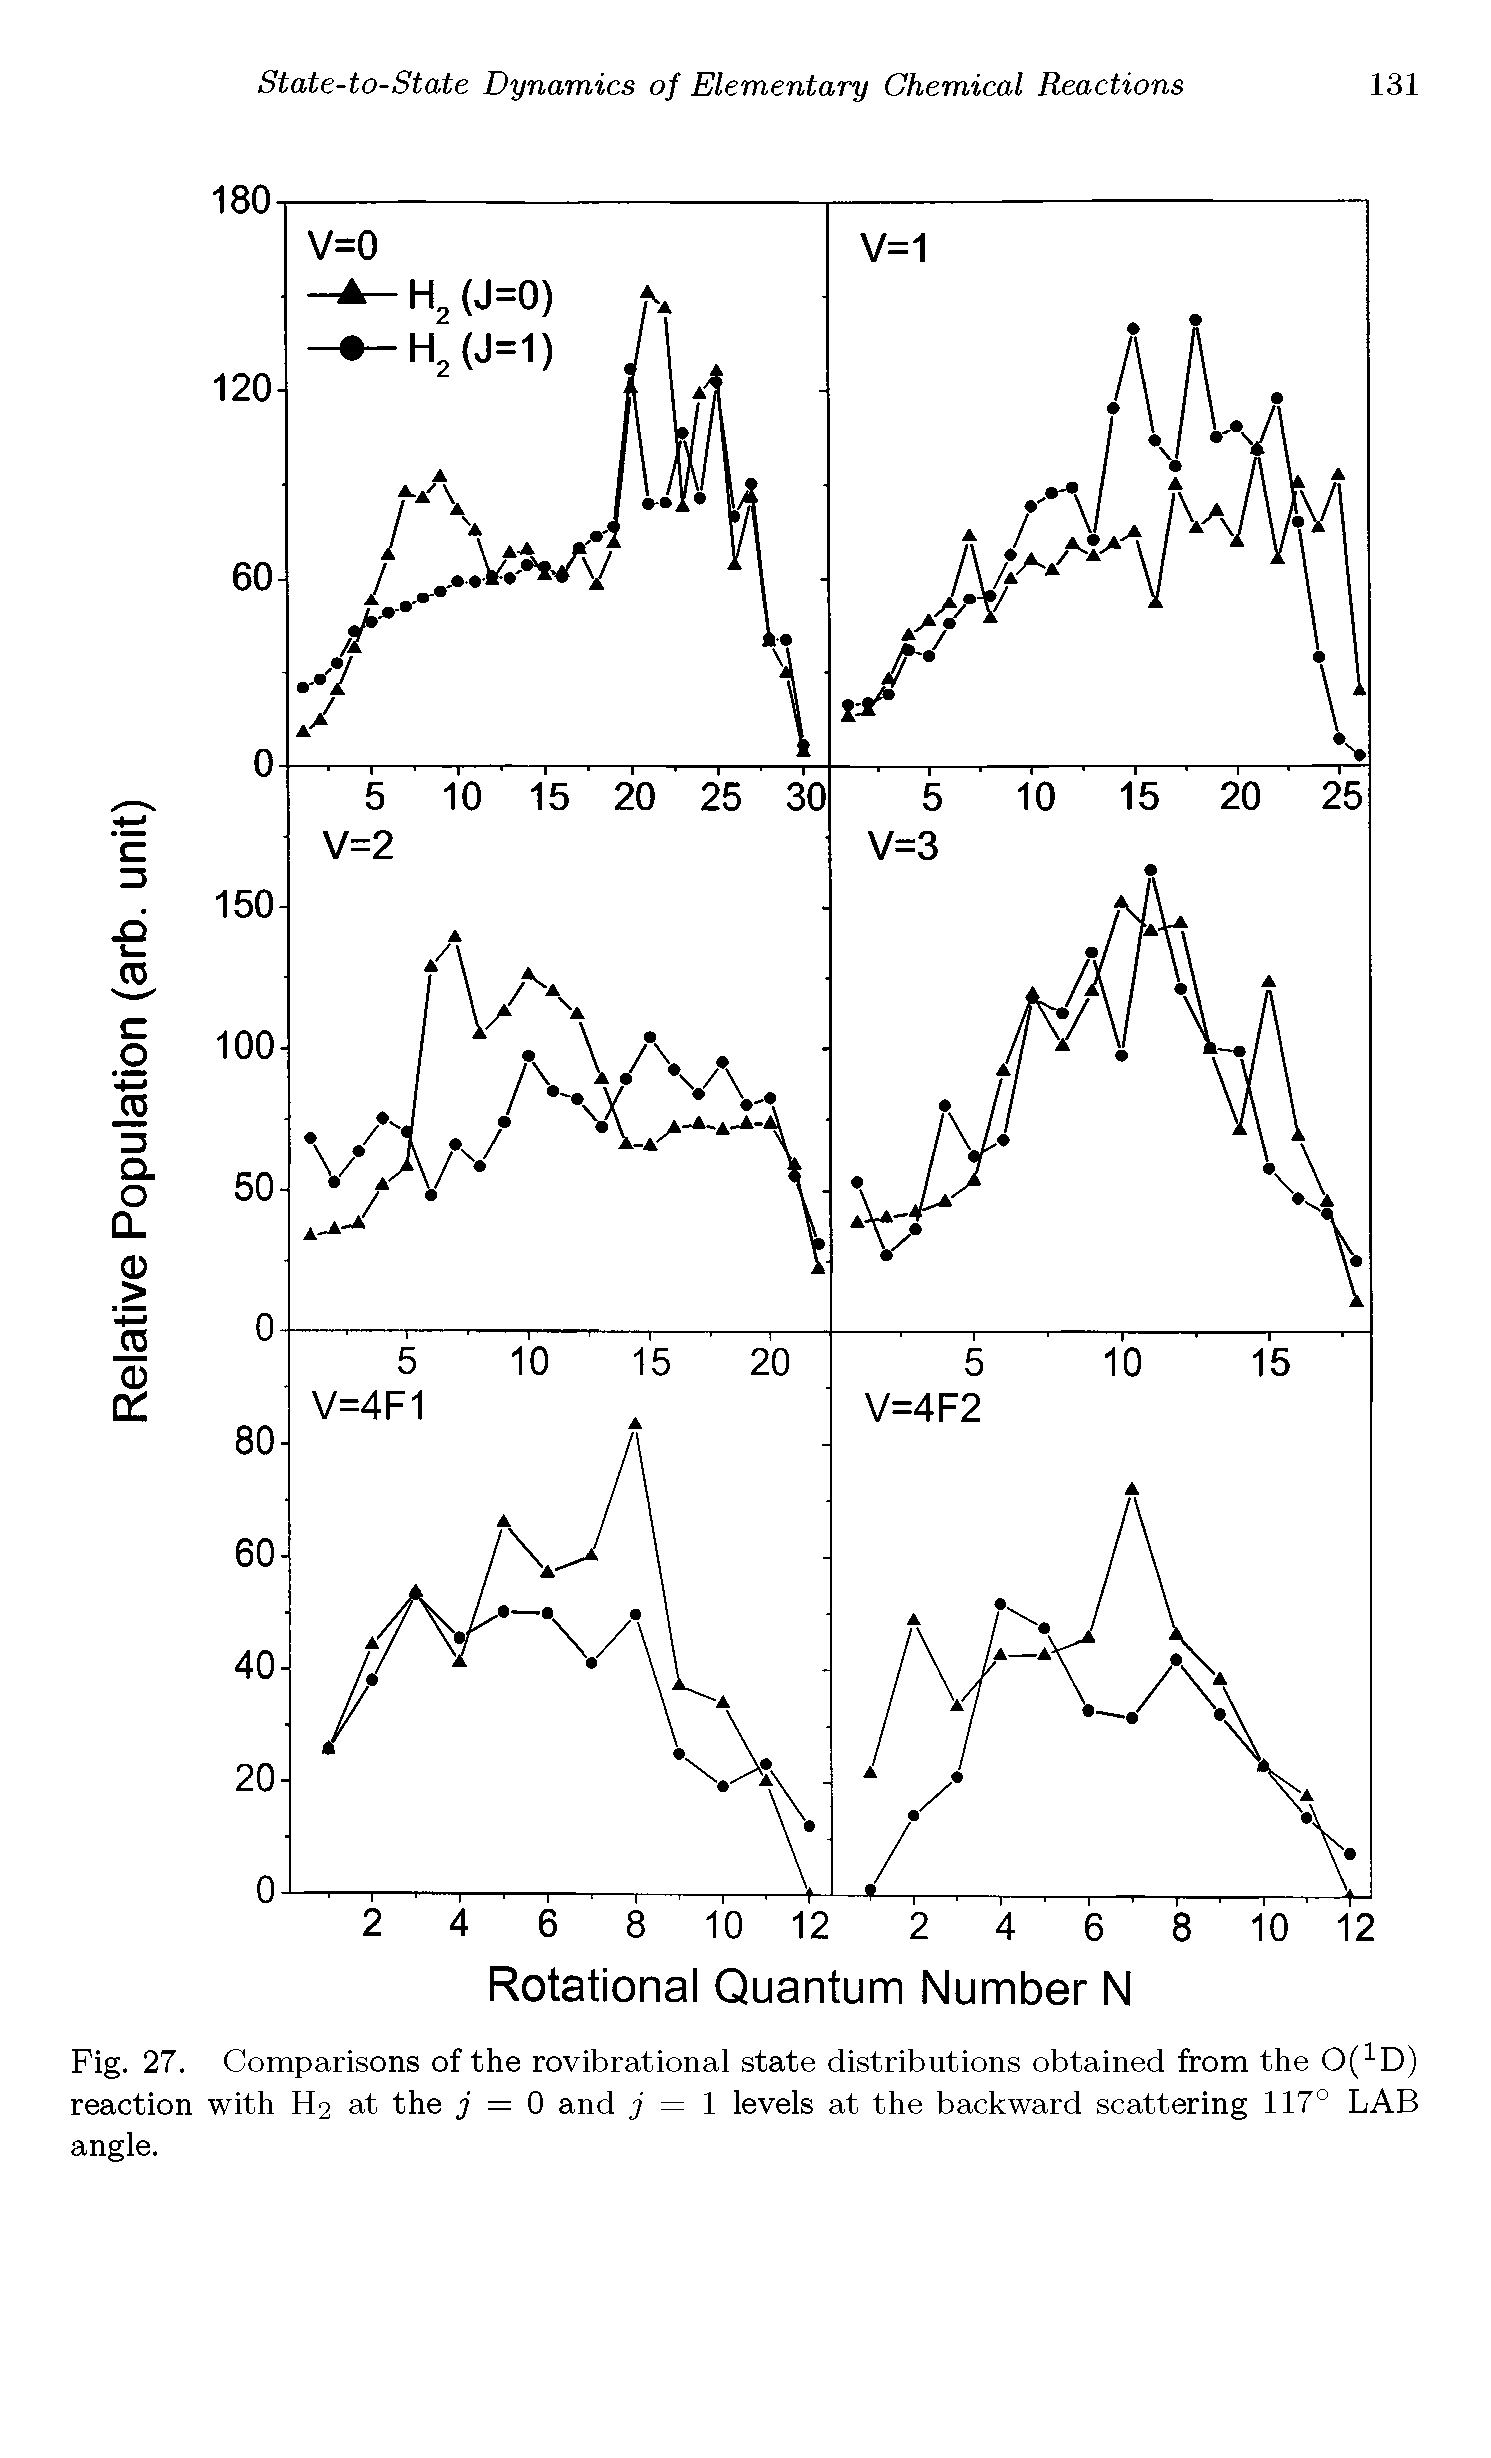 Fig. 27. Comparisons of the rovibrational state distributions obtained from the 0(1D) reaction with H2 at the j = 0 and j = 1 levels at the backward scattering 117° LAB angle.